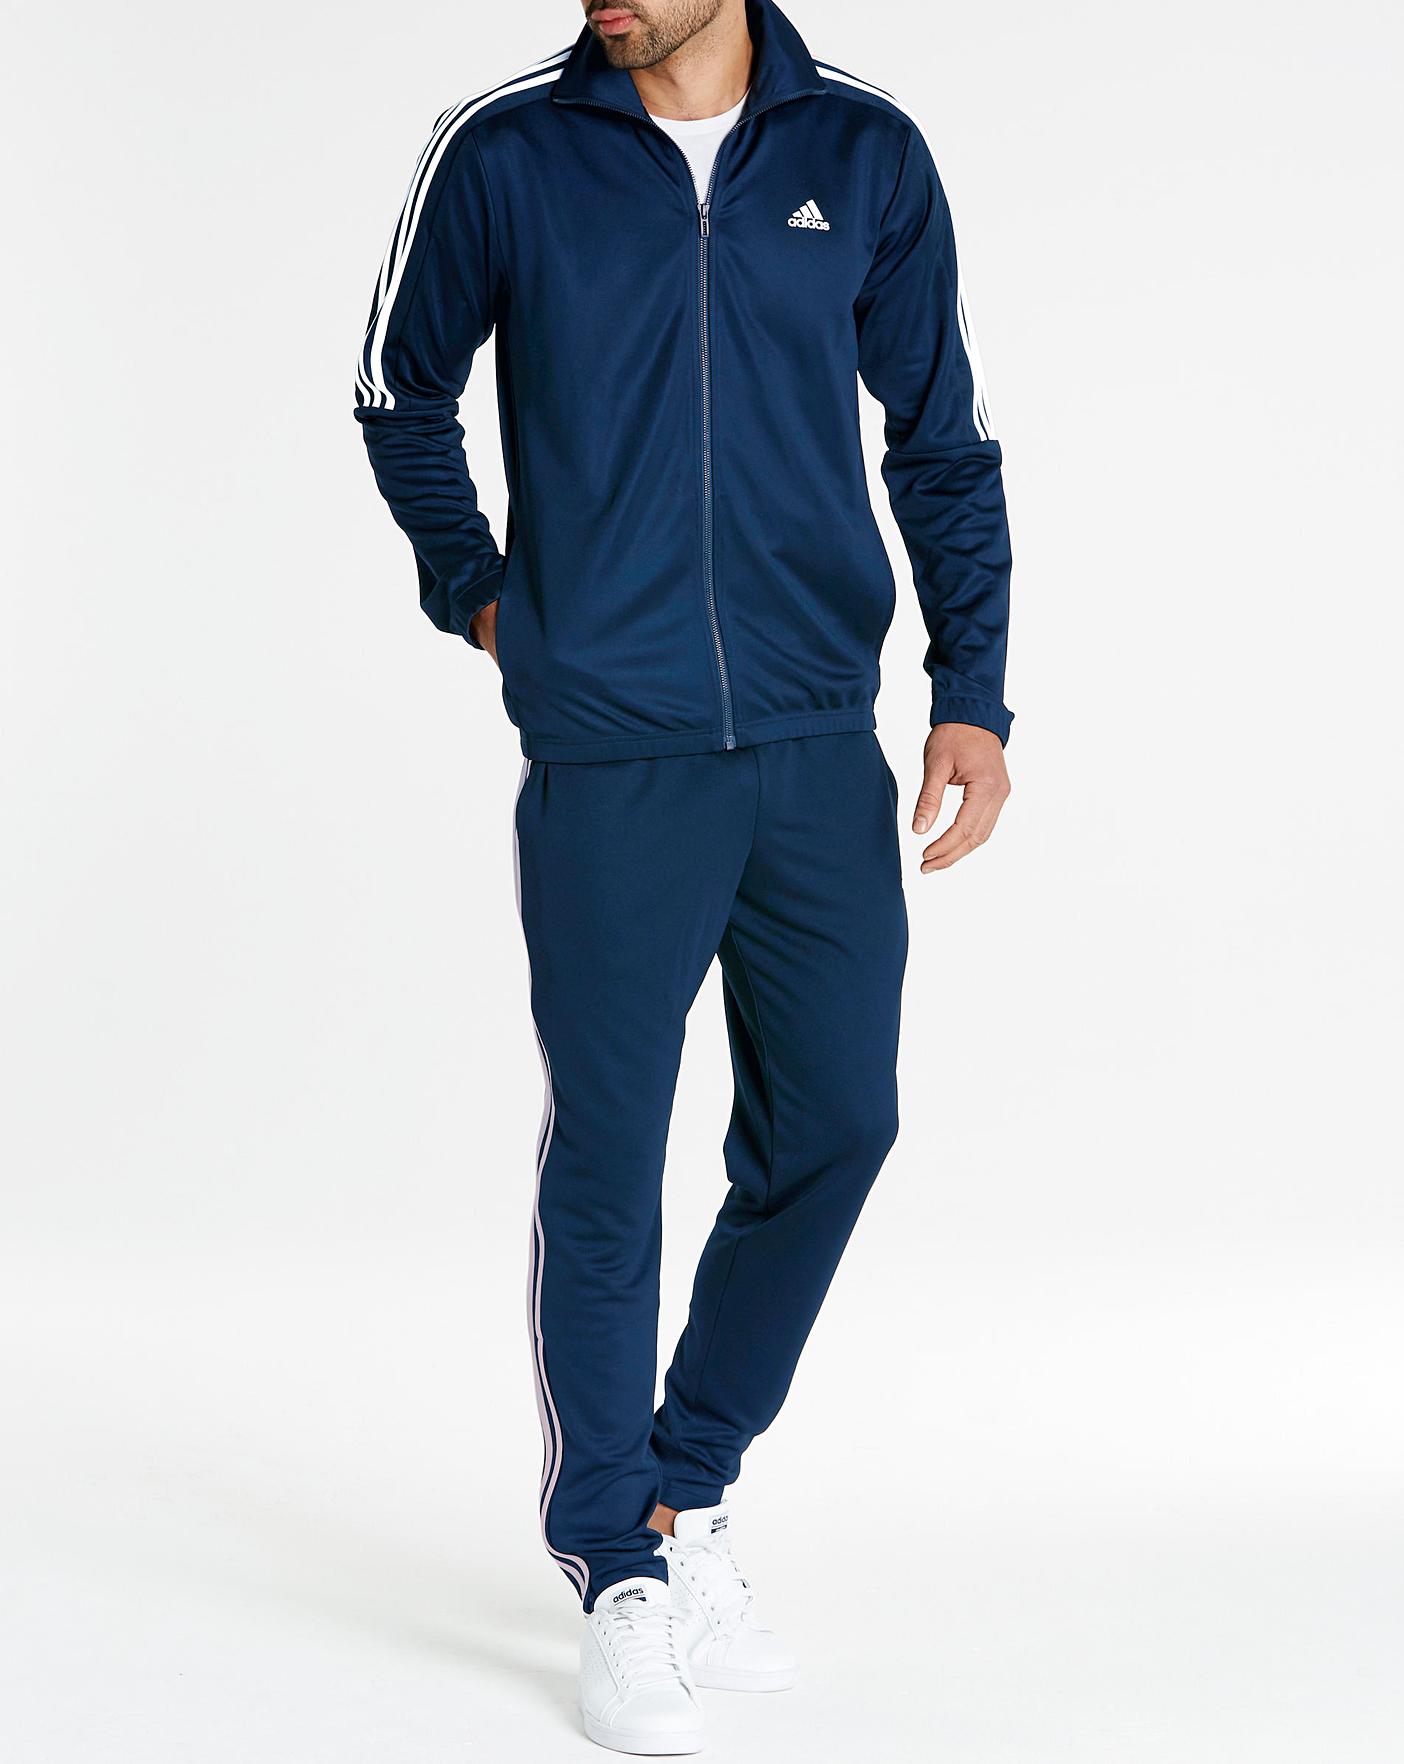 adidas tracking suit